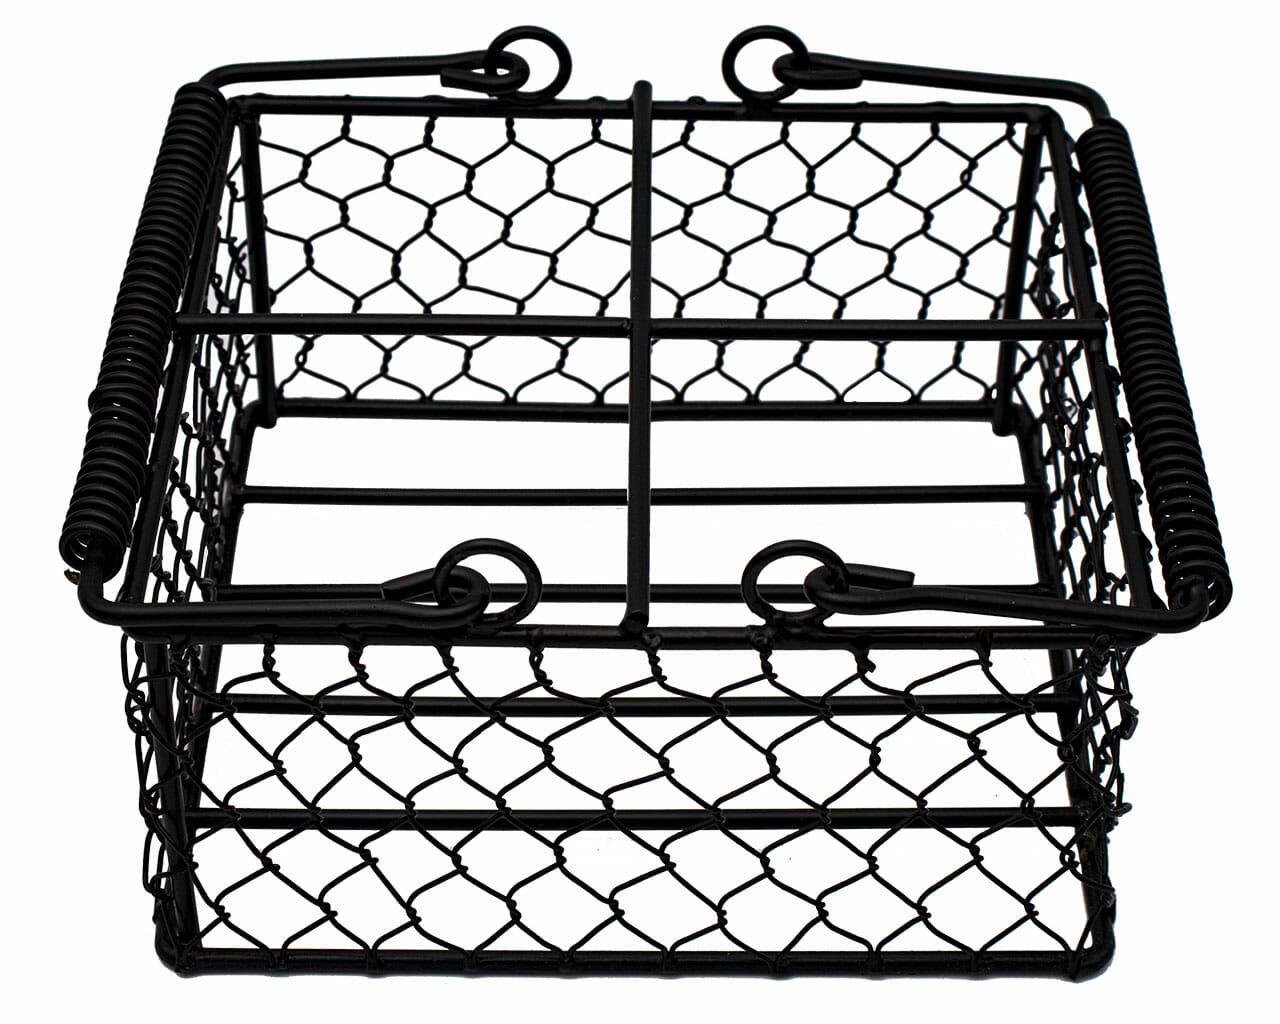 Black Coated Chicken Wire Caddy for Four 16oz Pint Mason Jars